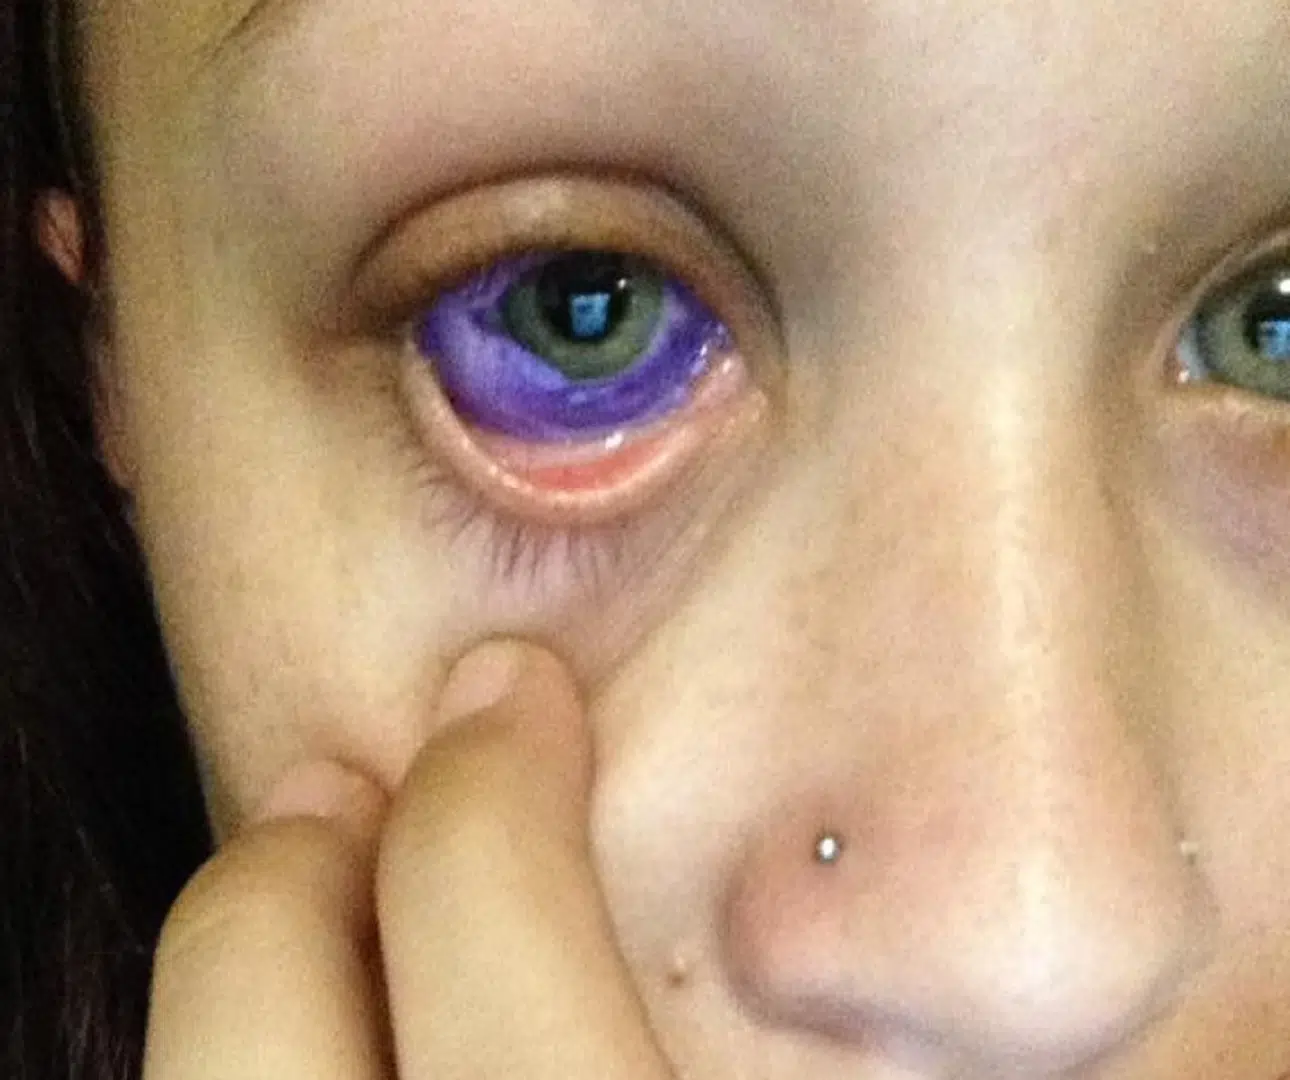 Eyeball tattooing: Calls for ban as procedure regulated in New South Wales  - ABC News